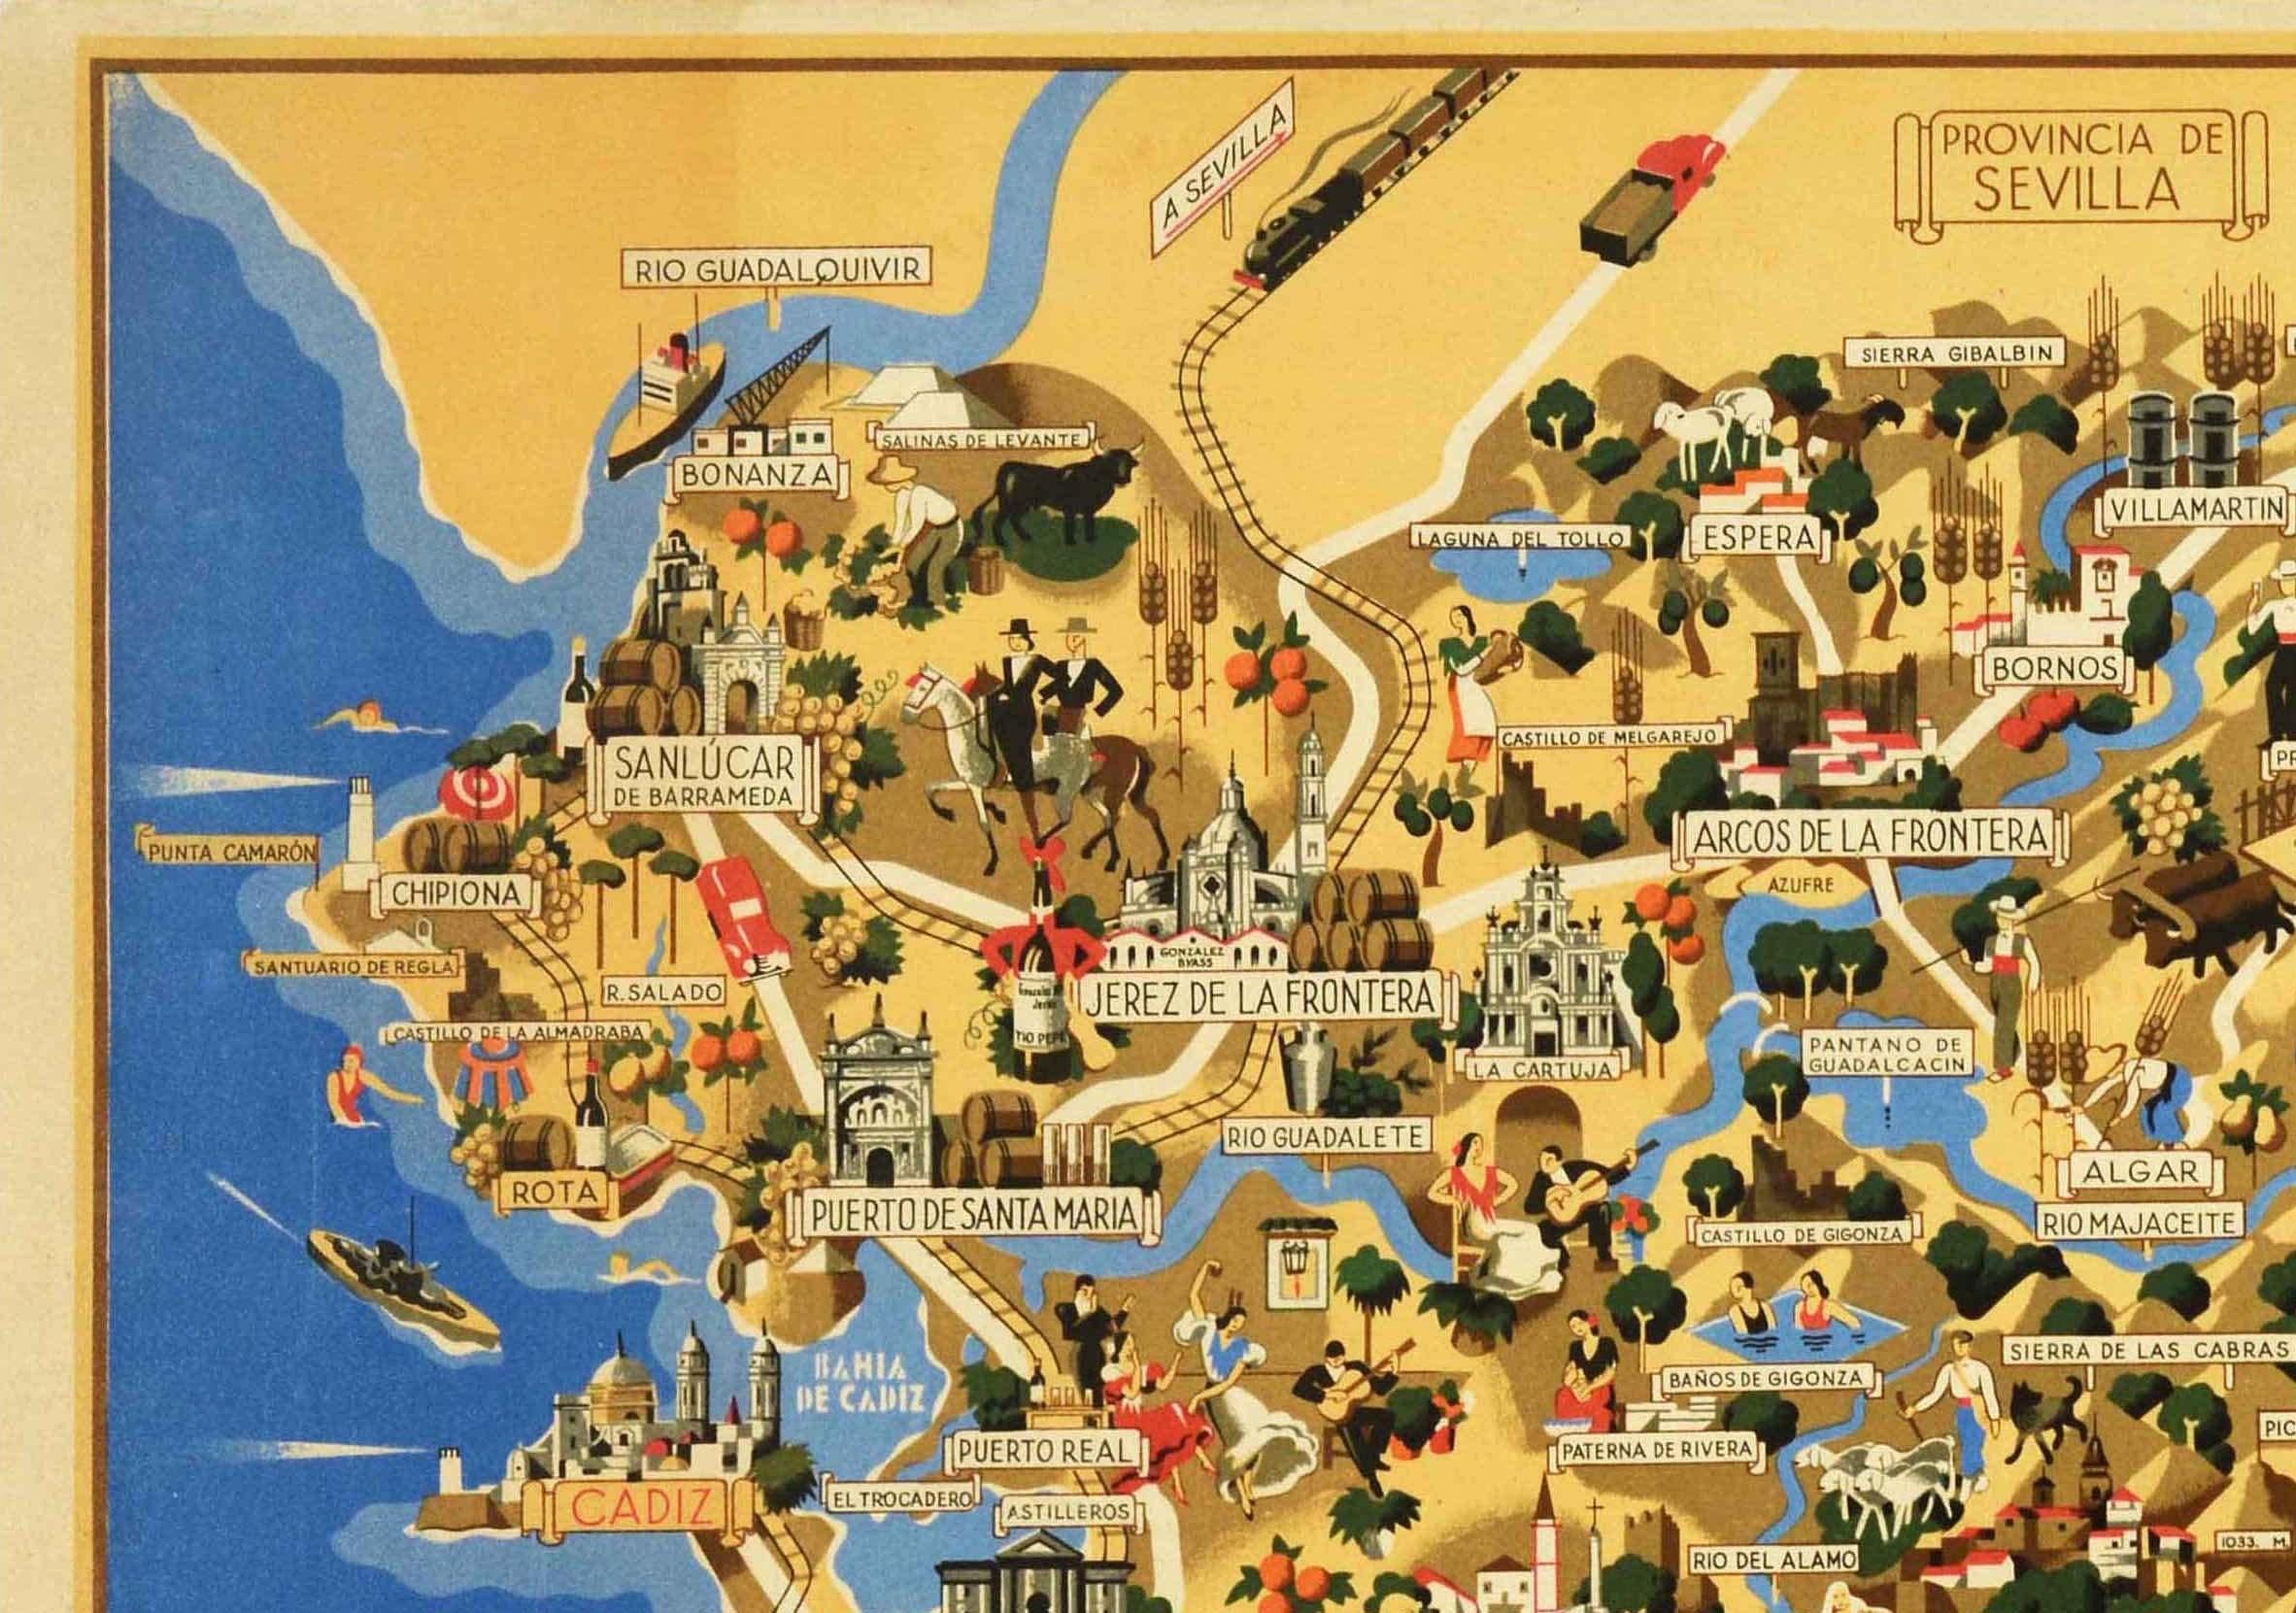 Original vintage travel poster for the Provincia de Cadiz featuring an illustrated map marking the cities and other locations with a list of distinguished people and principal industry and products listed on the side - Gaditanos Ilustres / Principal